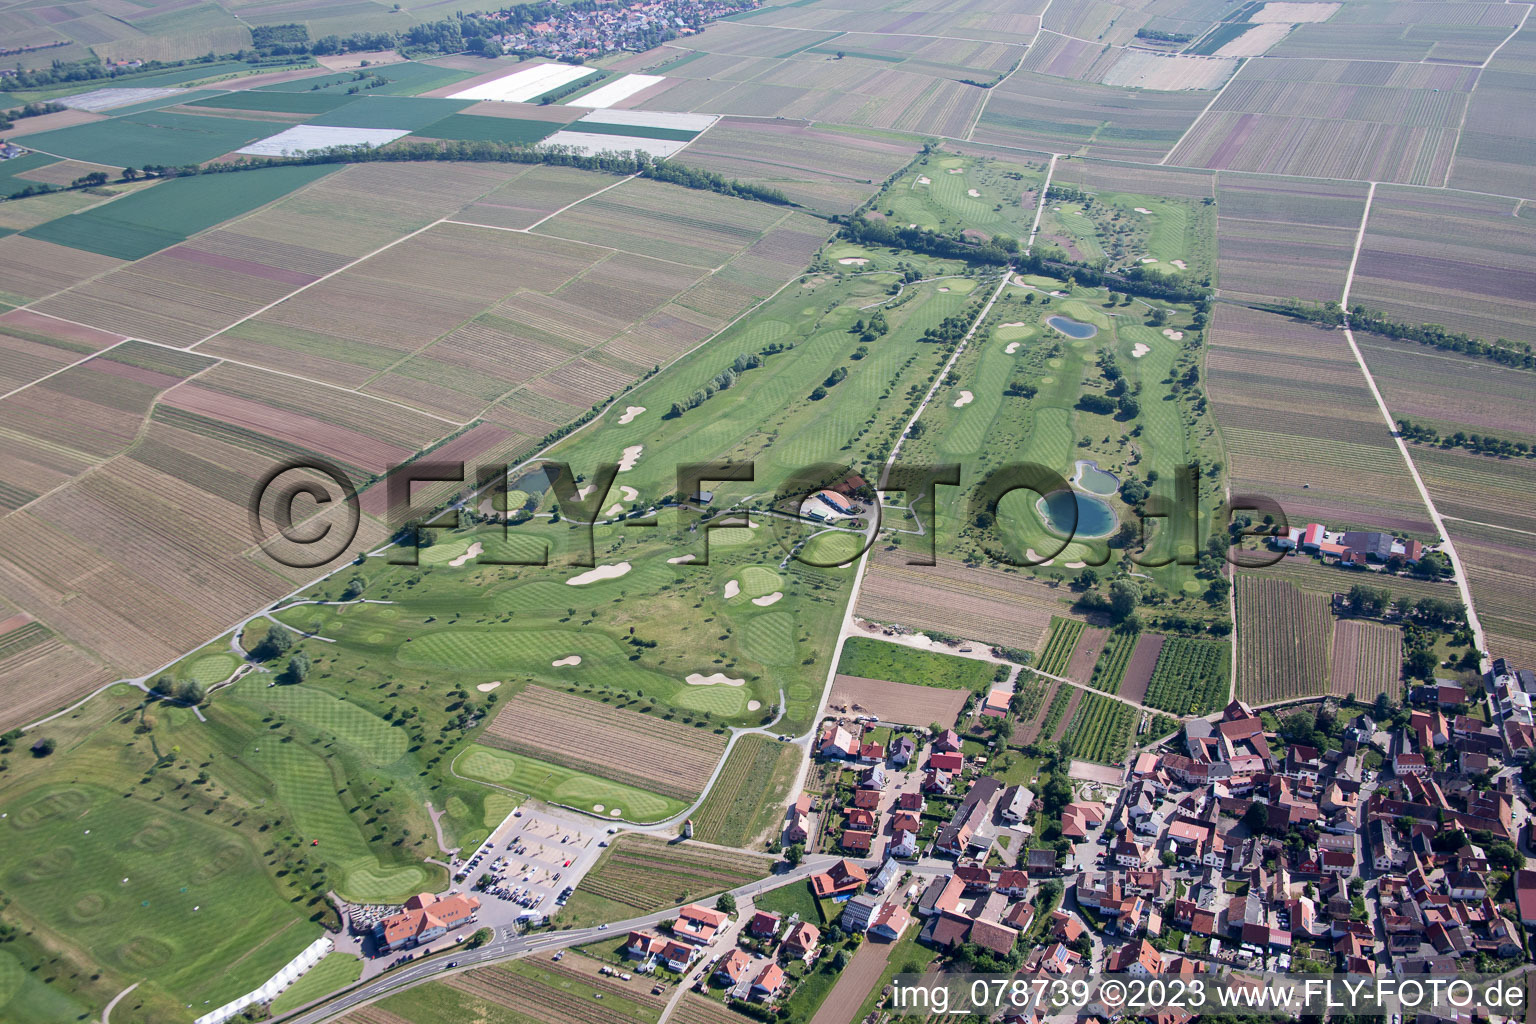 Golf course in Dackenheim in the state Rhineland-Palatinate, Germany from the plane